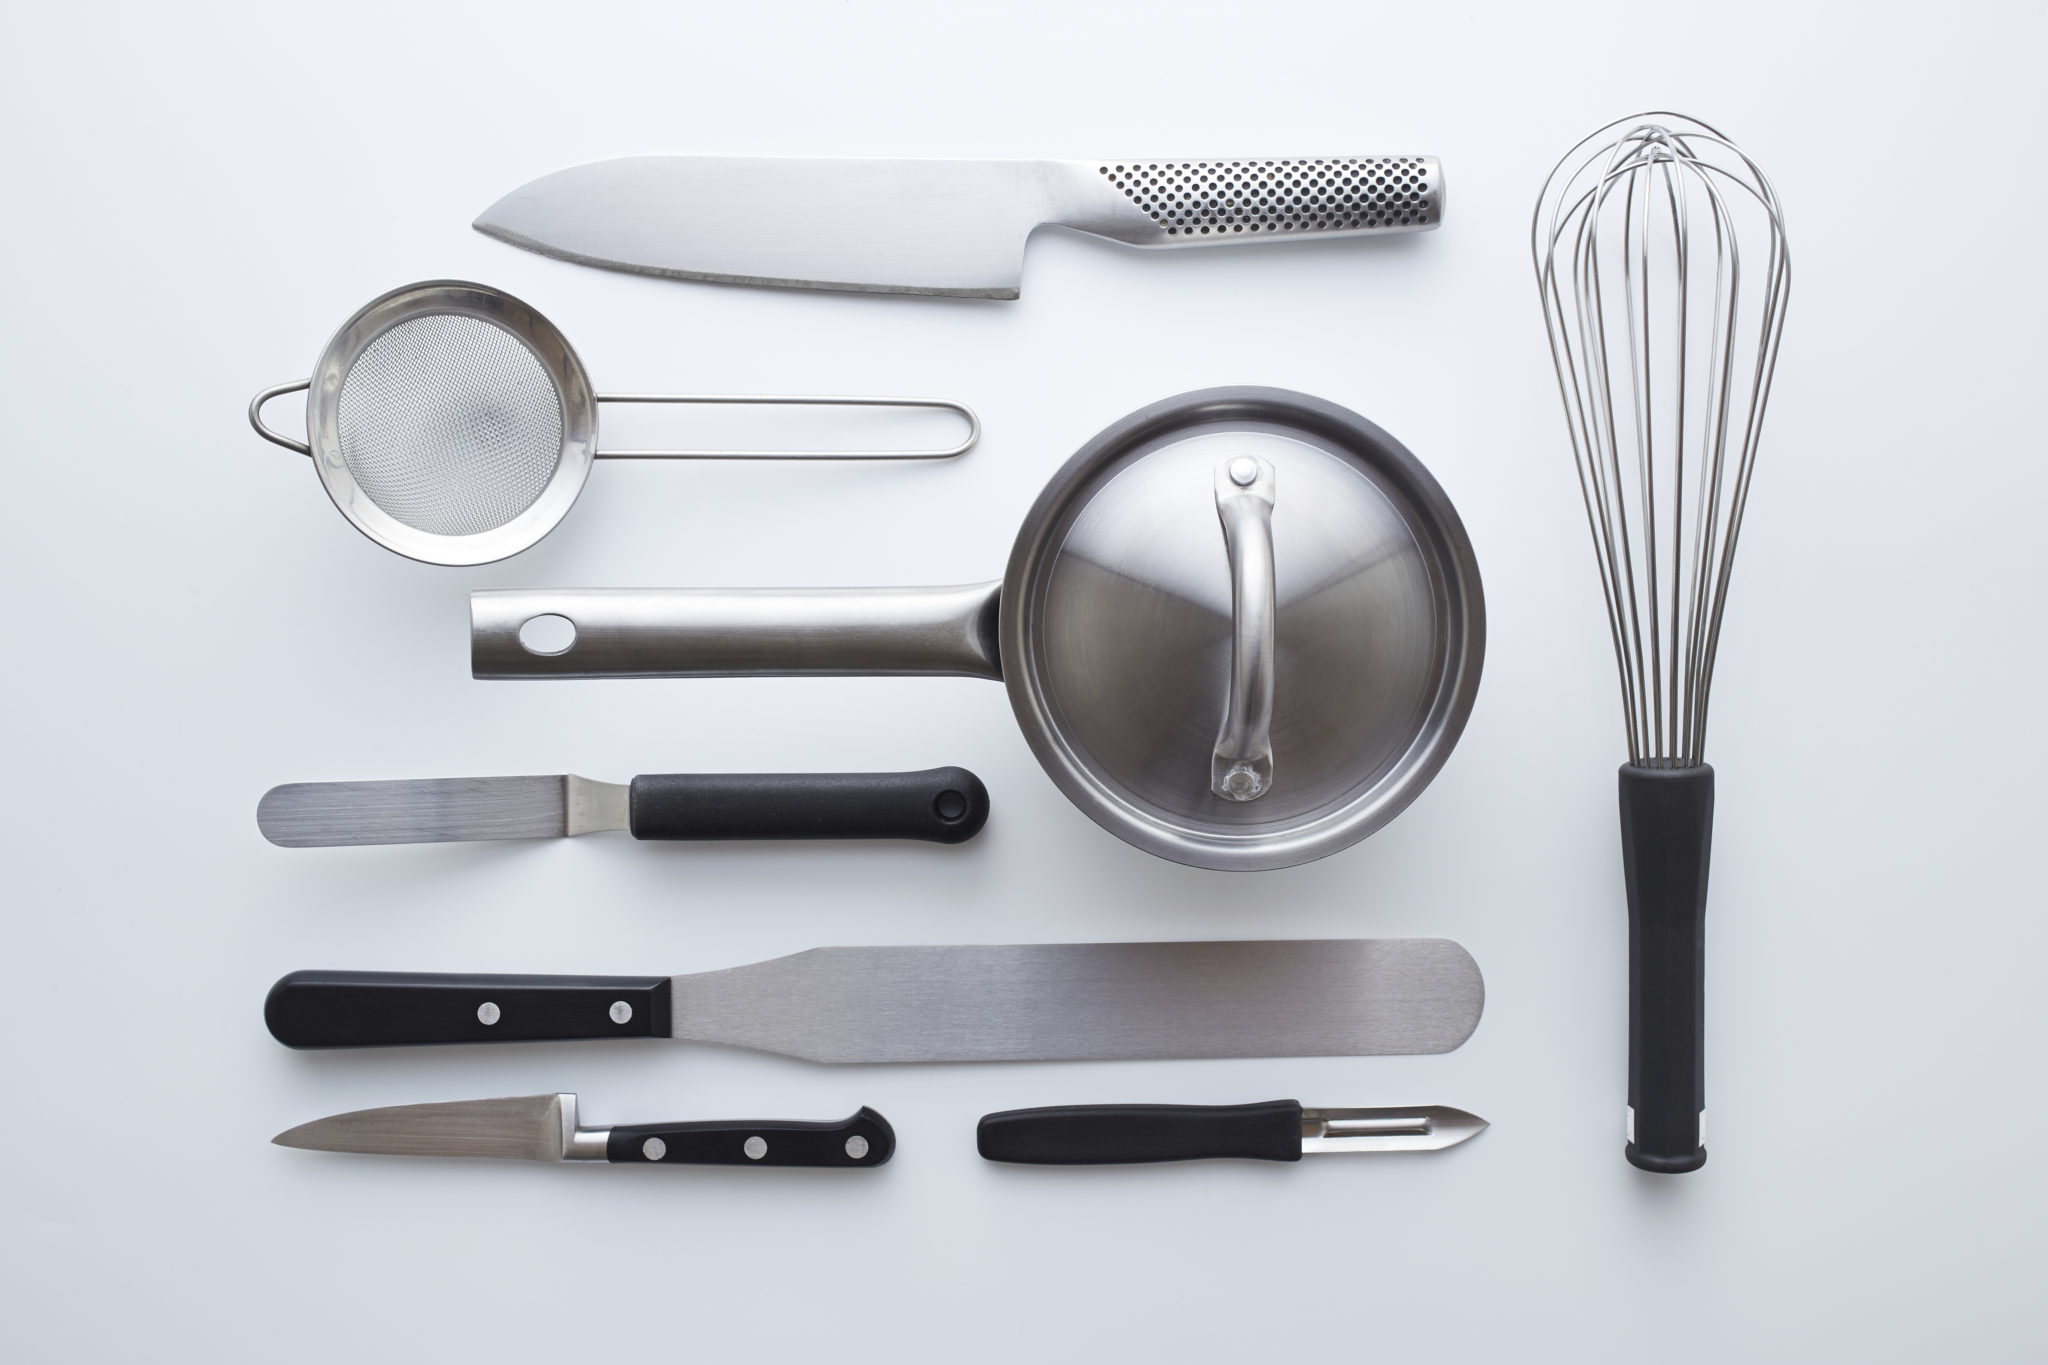 5 Essential Cooking Tools Everyone Needs - Chef Gourmet LLC